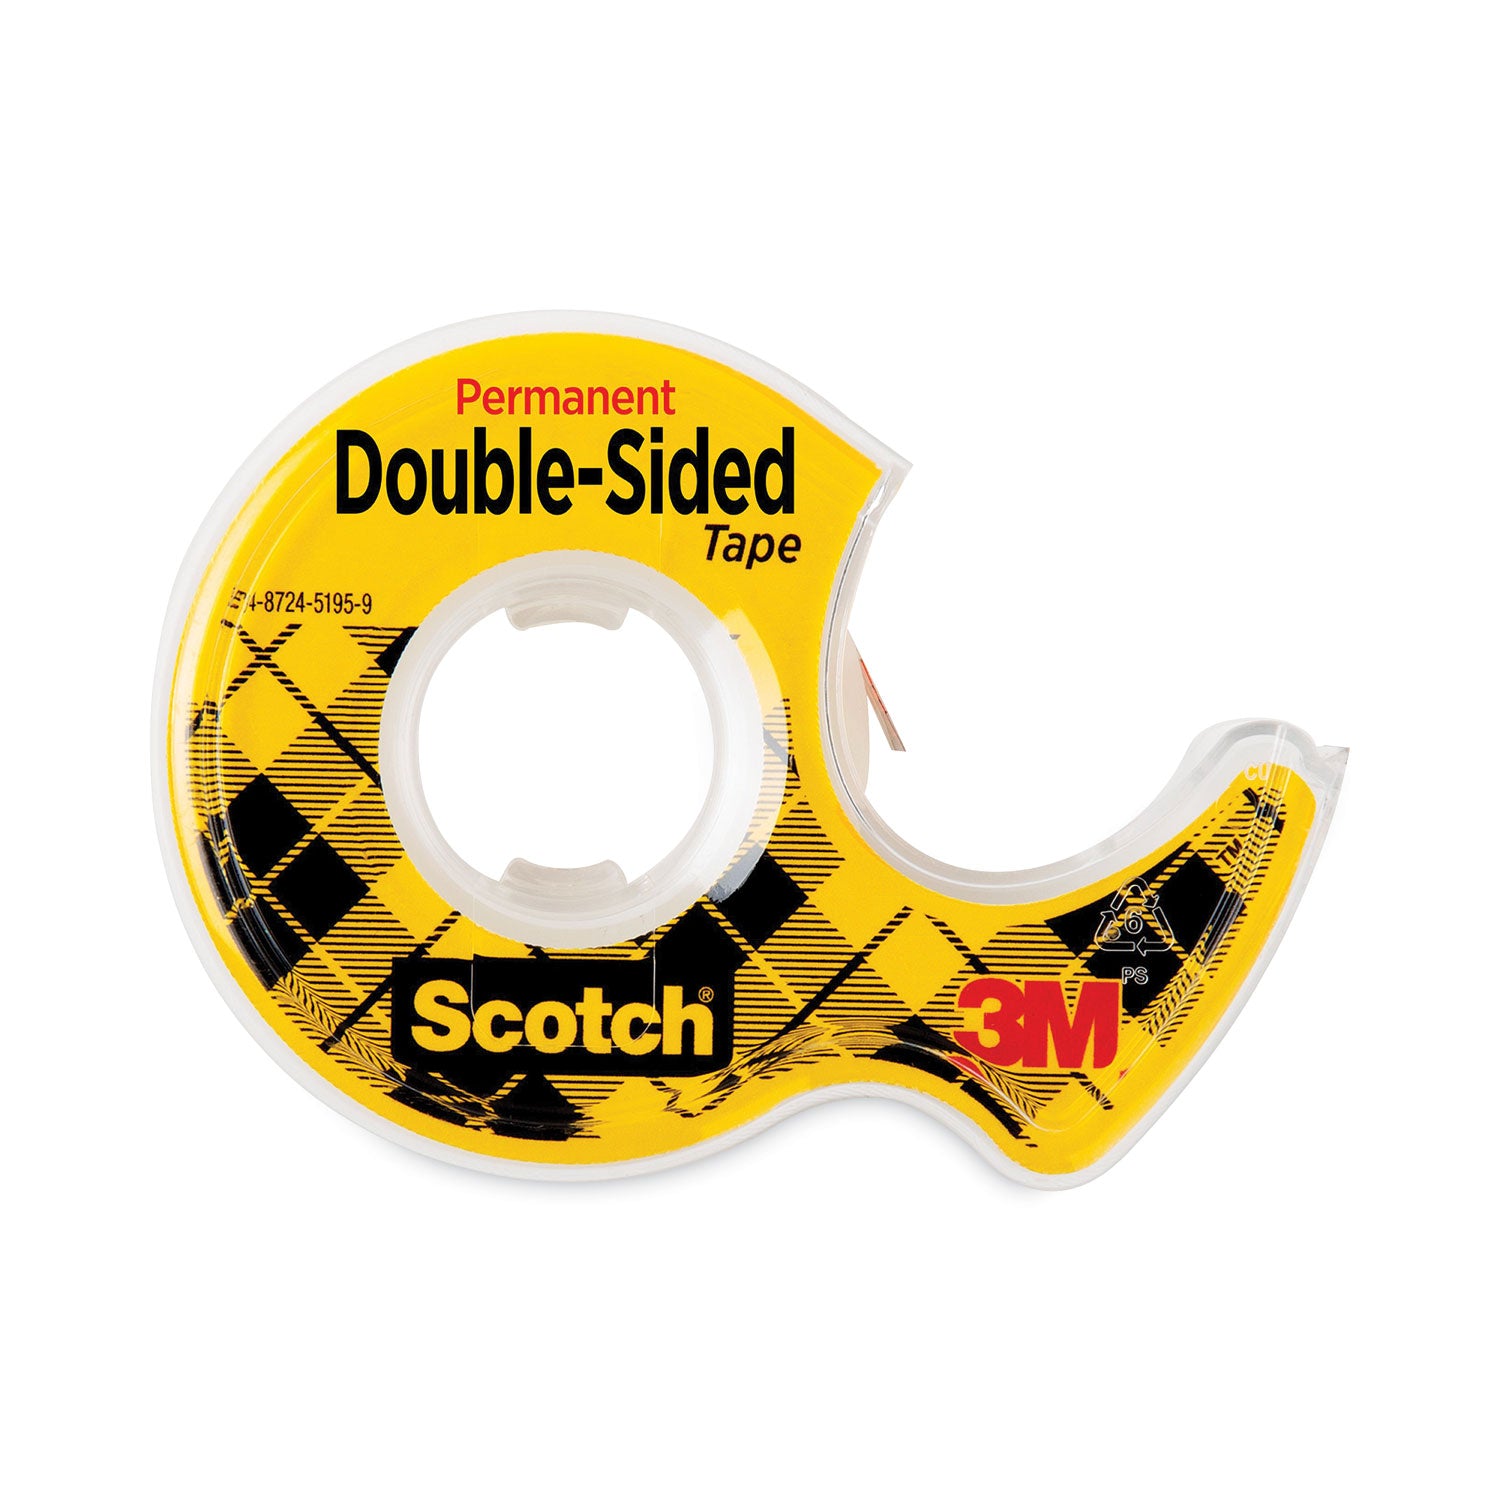 Double-Sided Permanent Tape in Handheld Dispenser, 1" Core, 0.5" x 37.5 ft, Clear - 